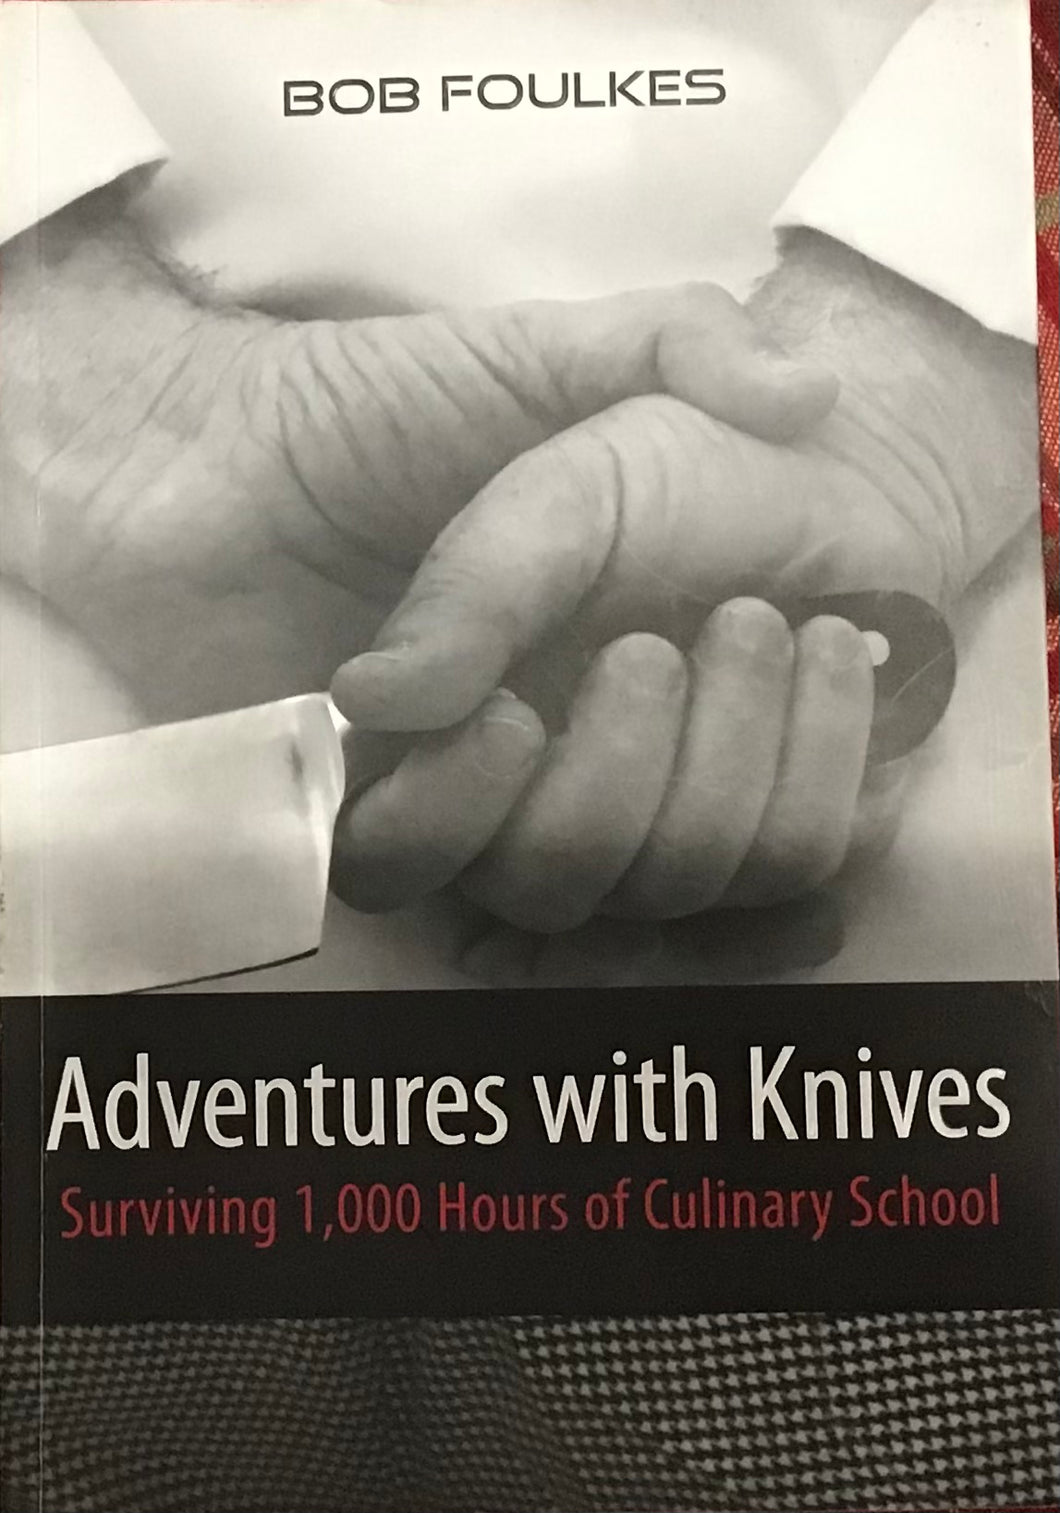 Adventures with Knives, Bob Foulkes